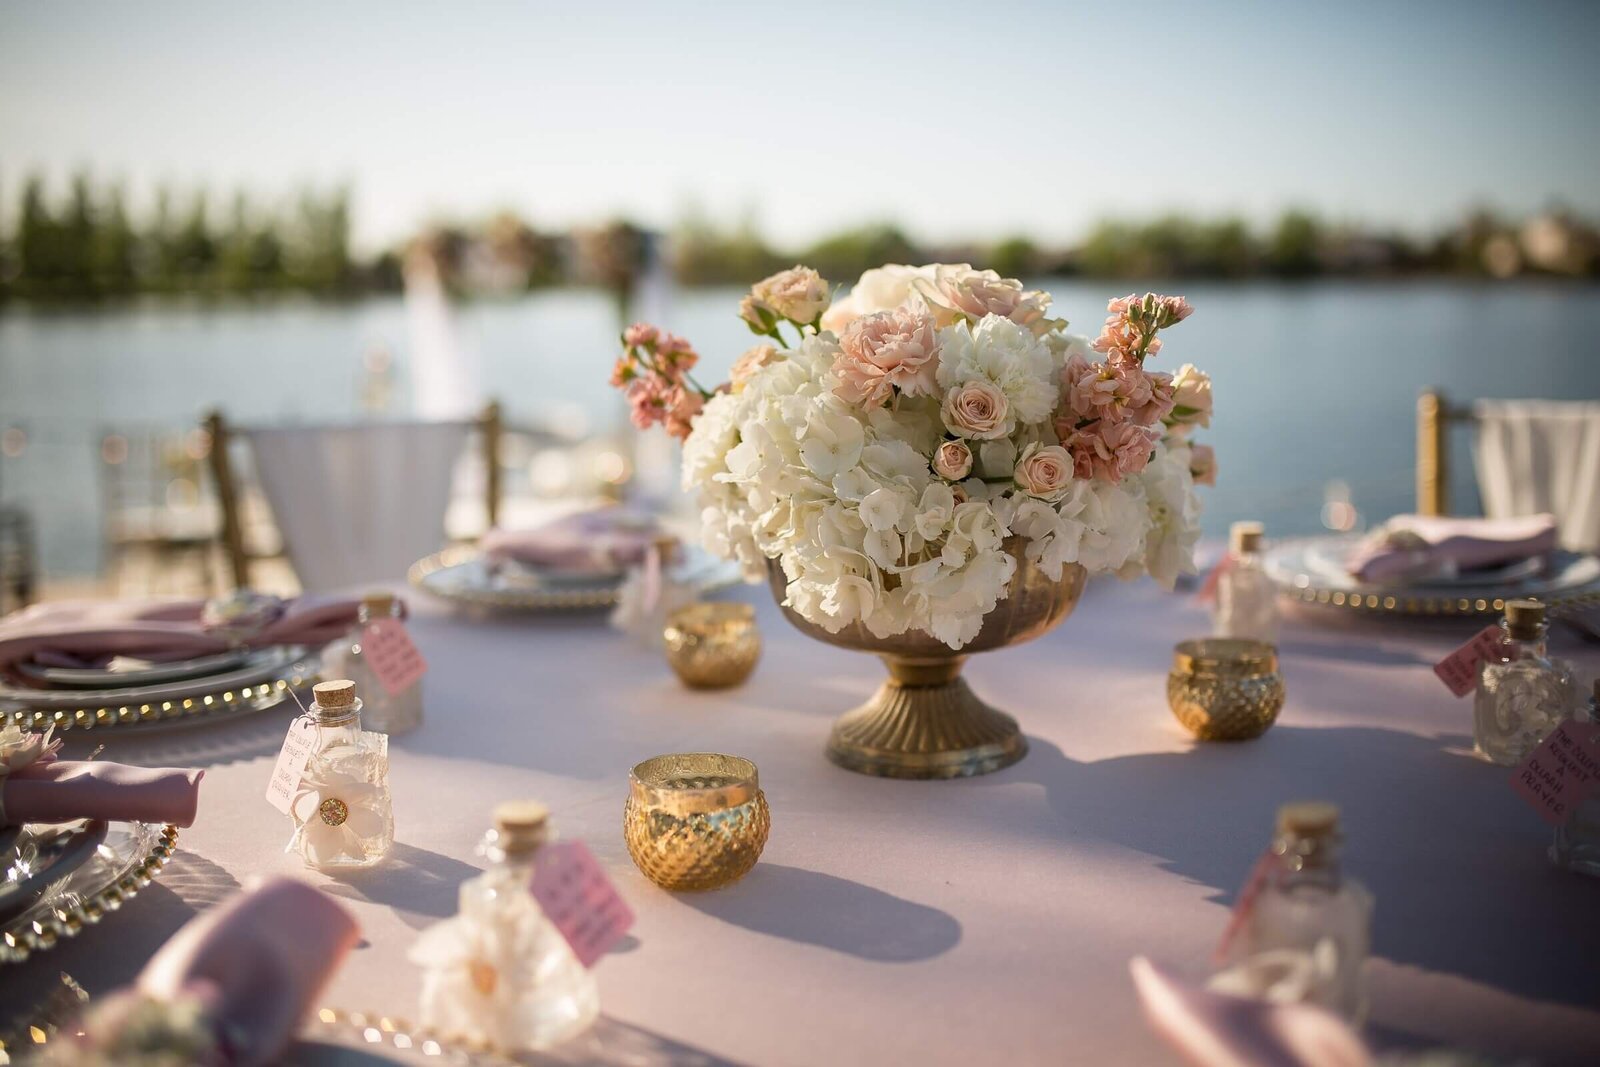 Wedding reception table with flowers in the middle and decorations that are mostly pink, captured by wedding photographer sacramento, ca philippe studio pro.